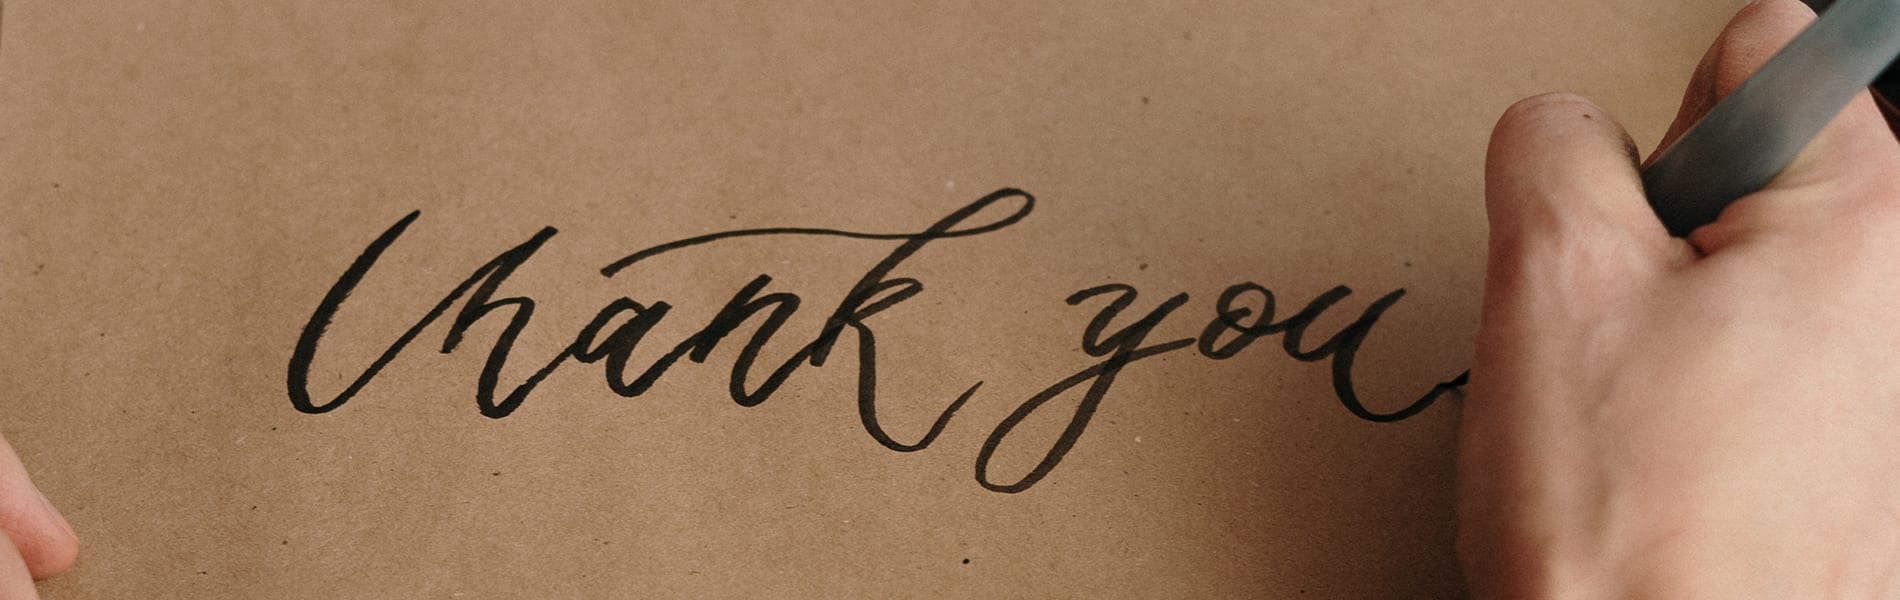 Creative ways to thank your donor